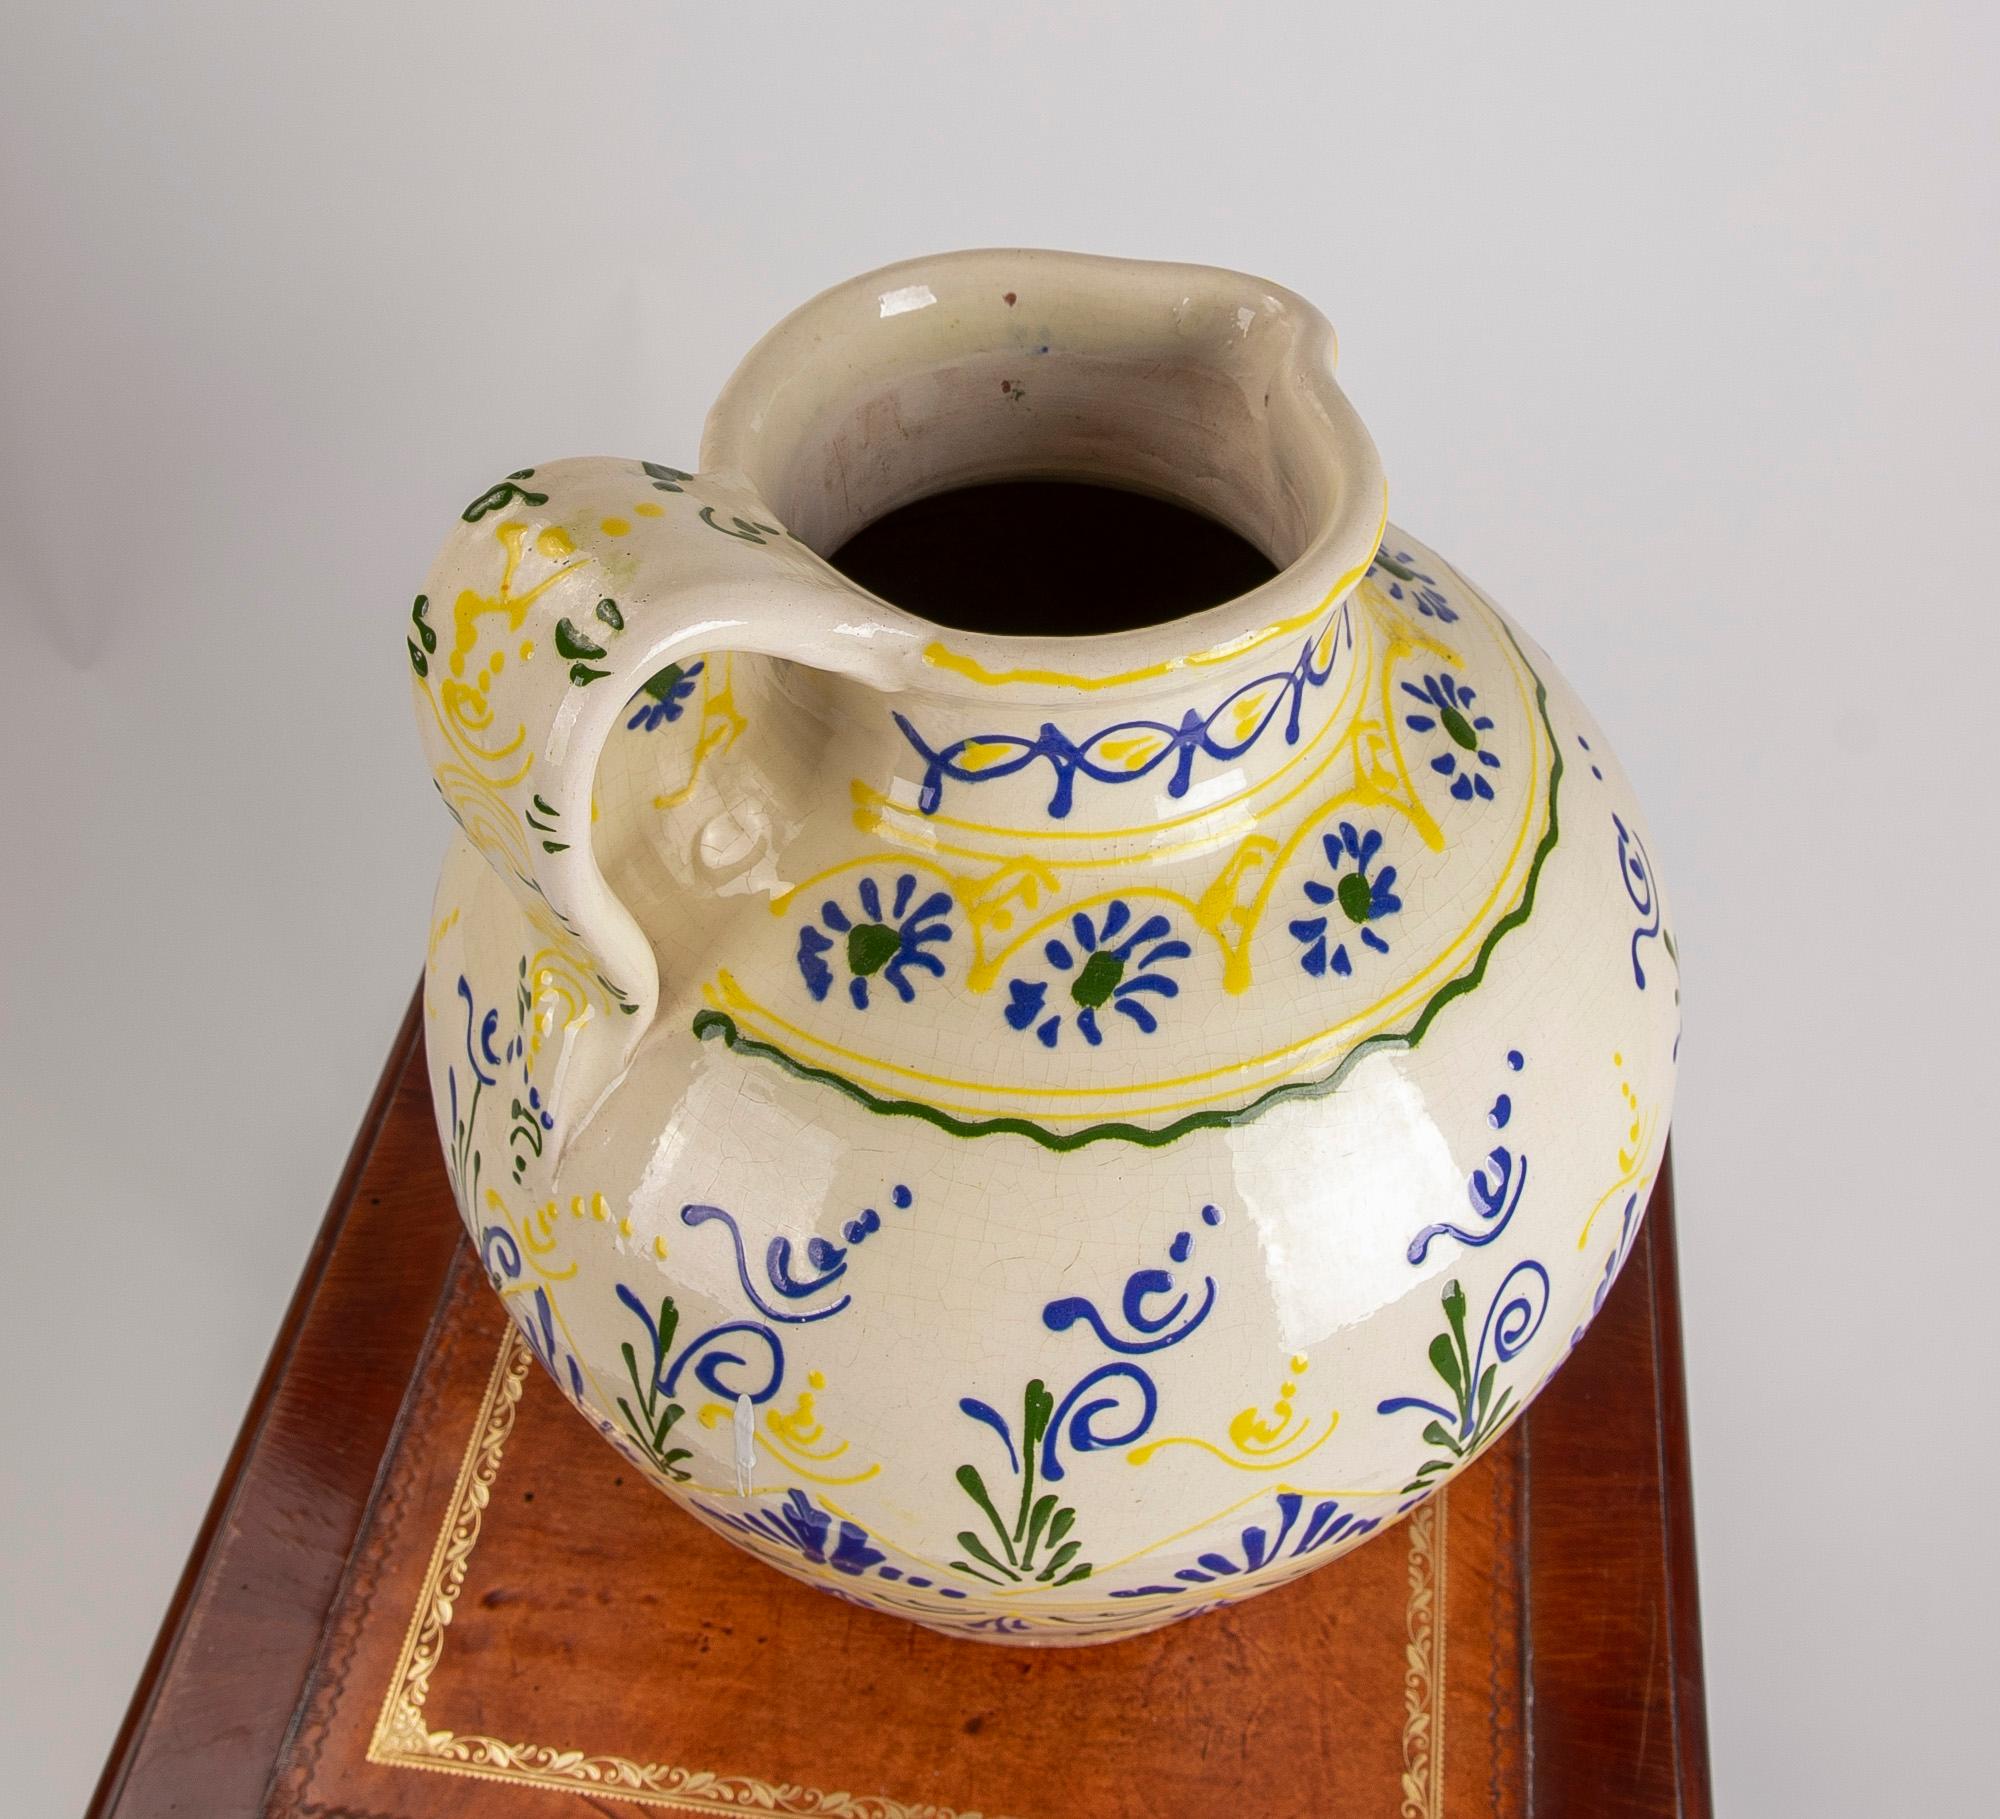 1980s Spanish Hand-Painted Ceramic Jug with Handle for Wine For Sale 3